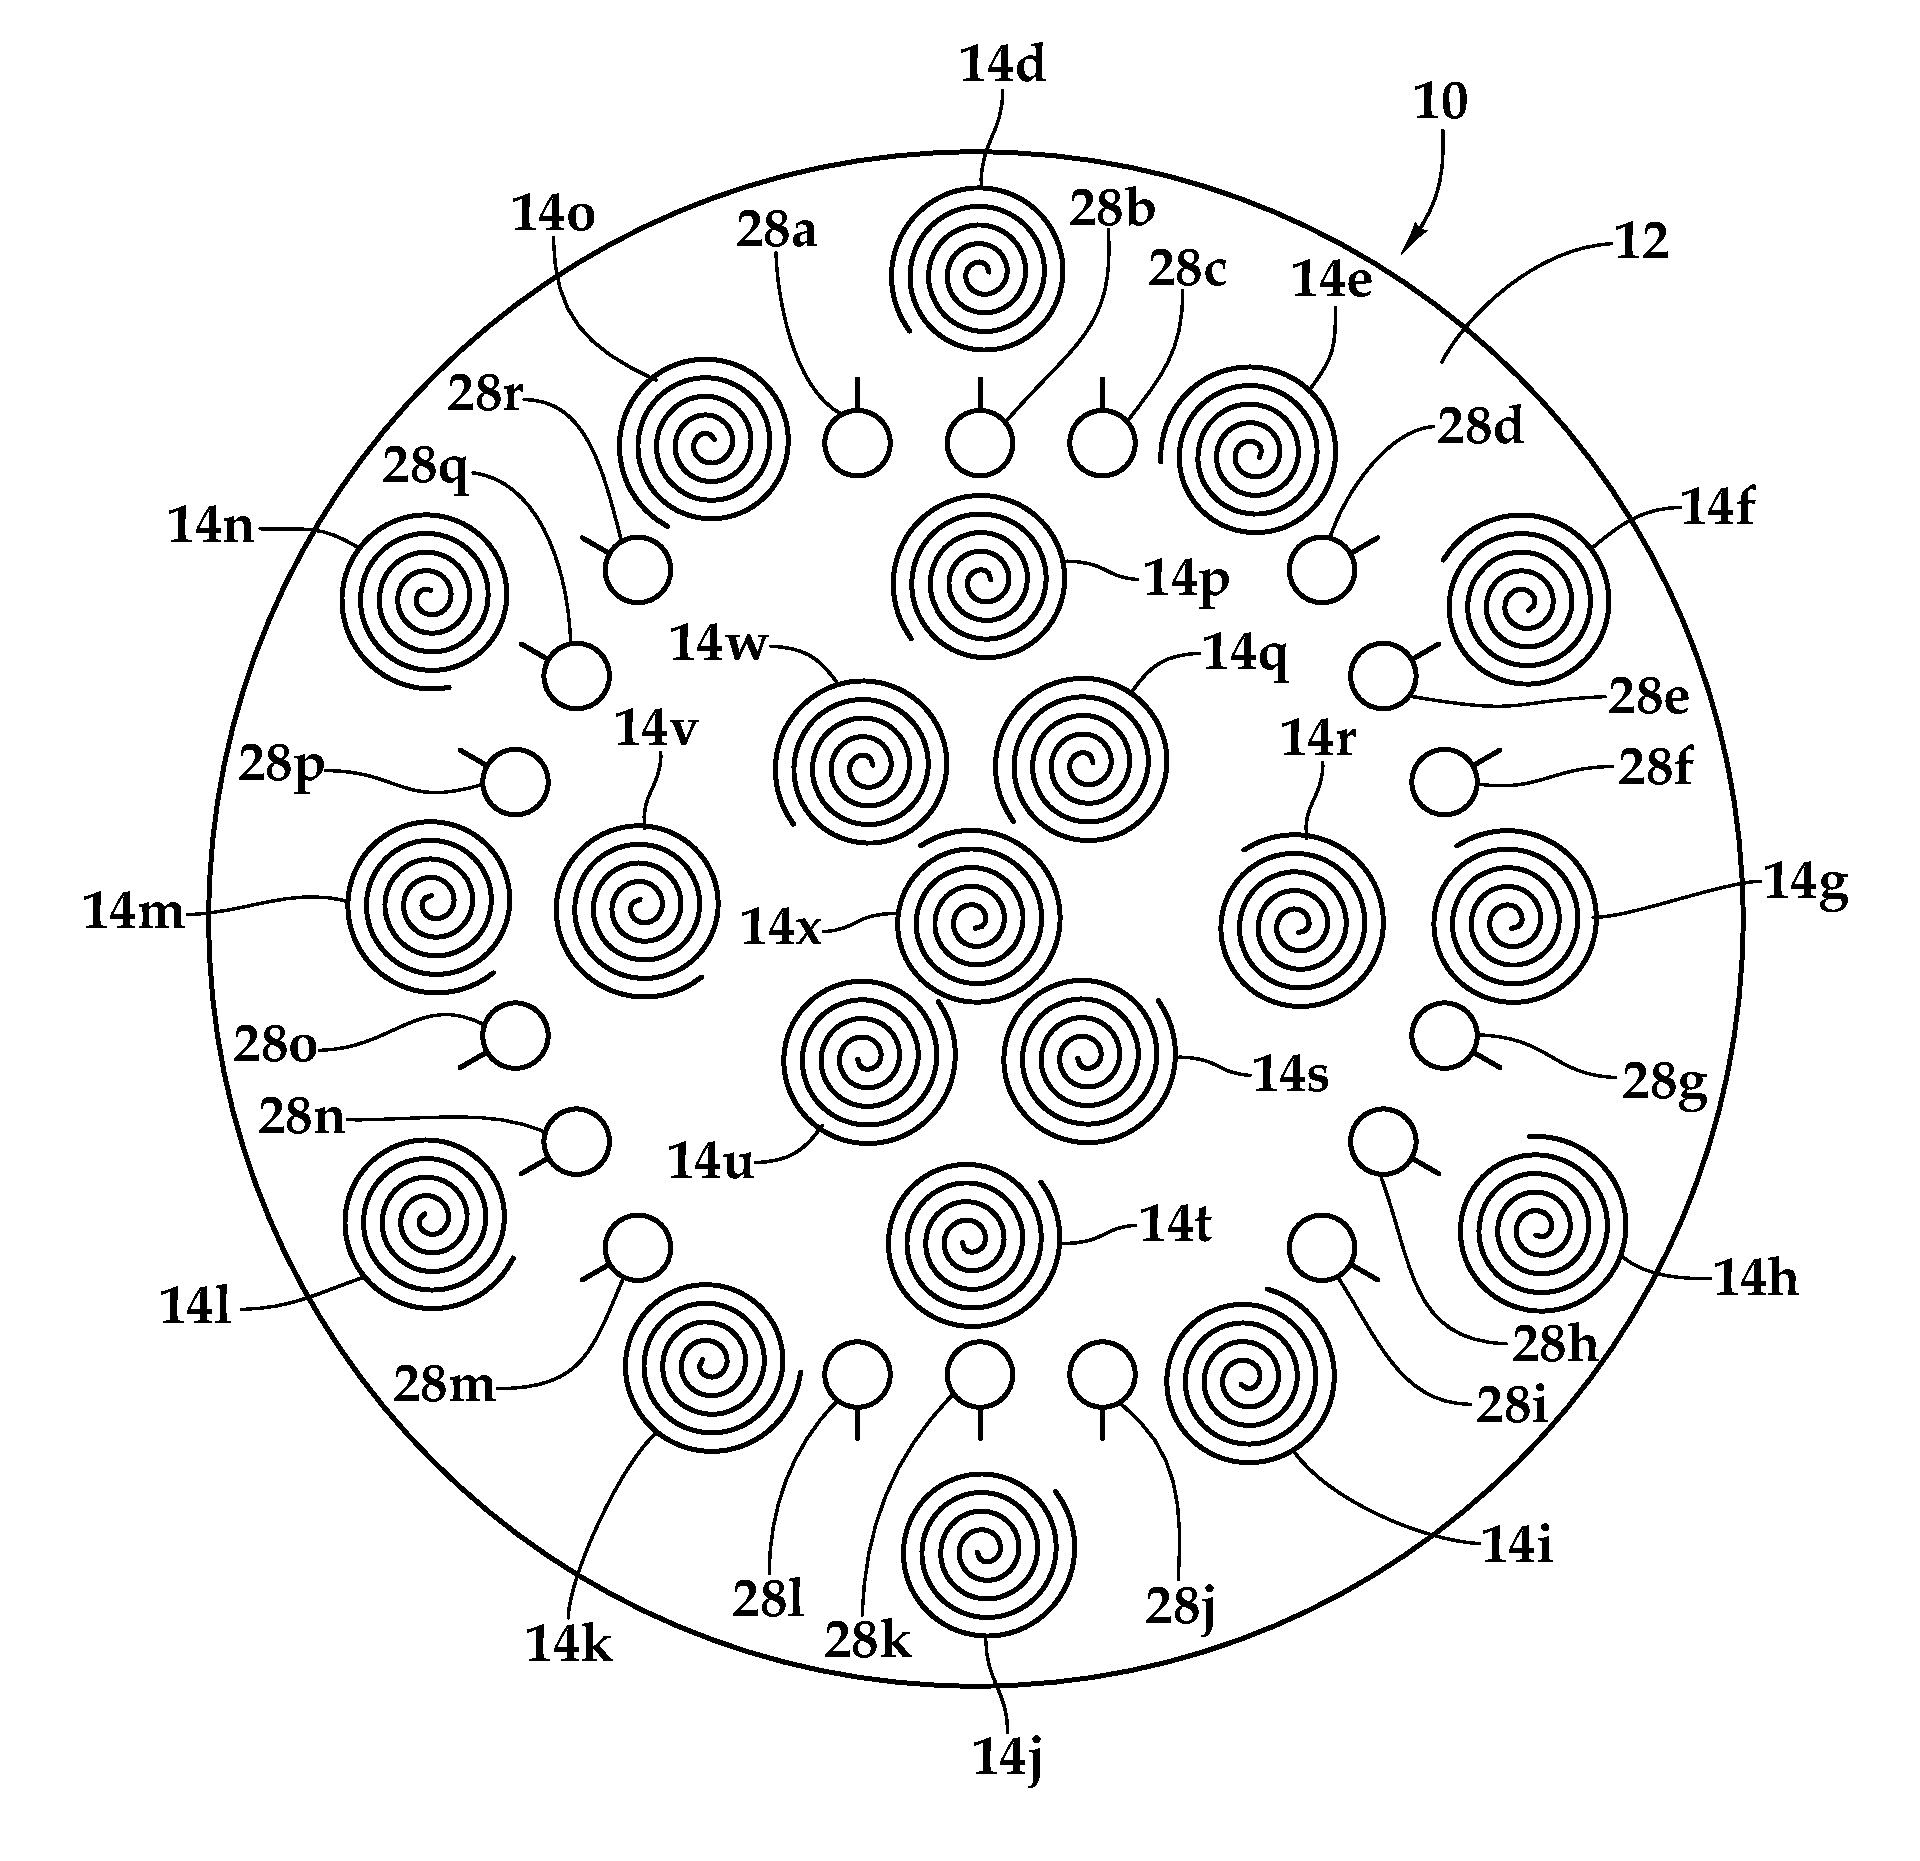 Planar antenna array and article of manufacture using same